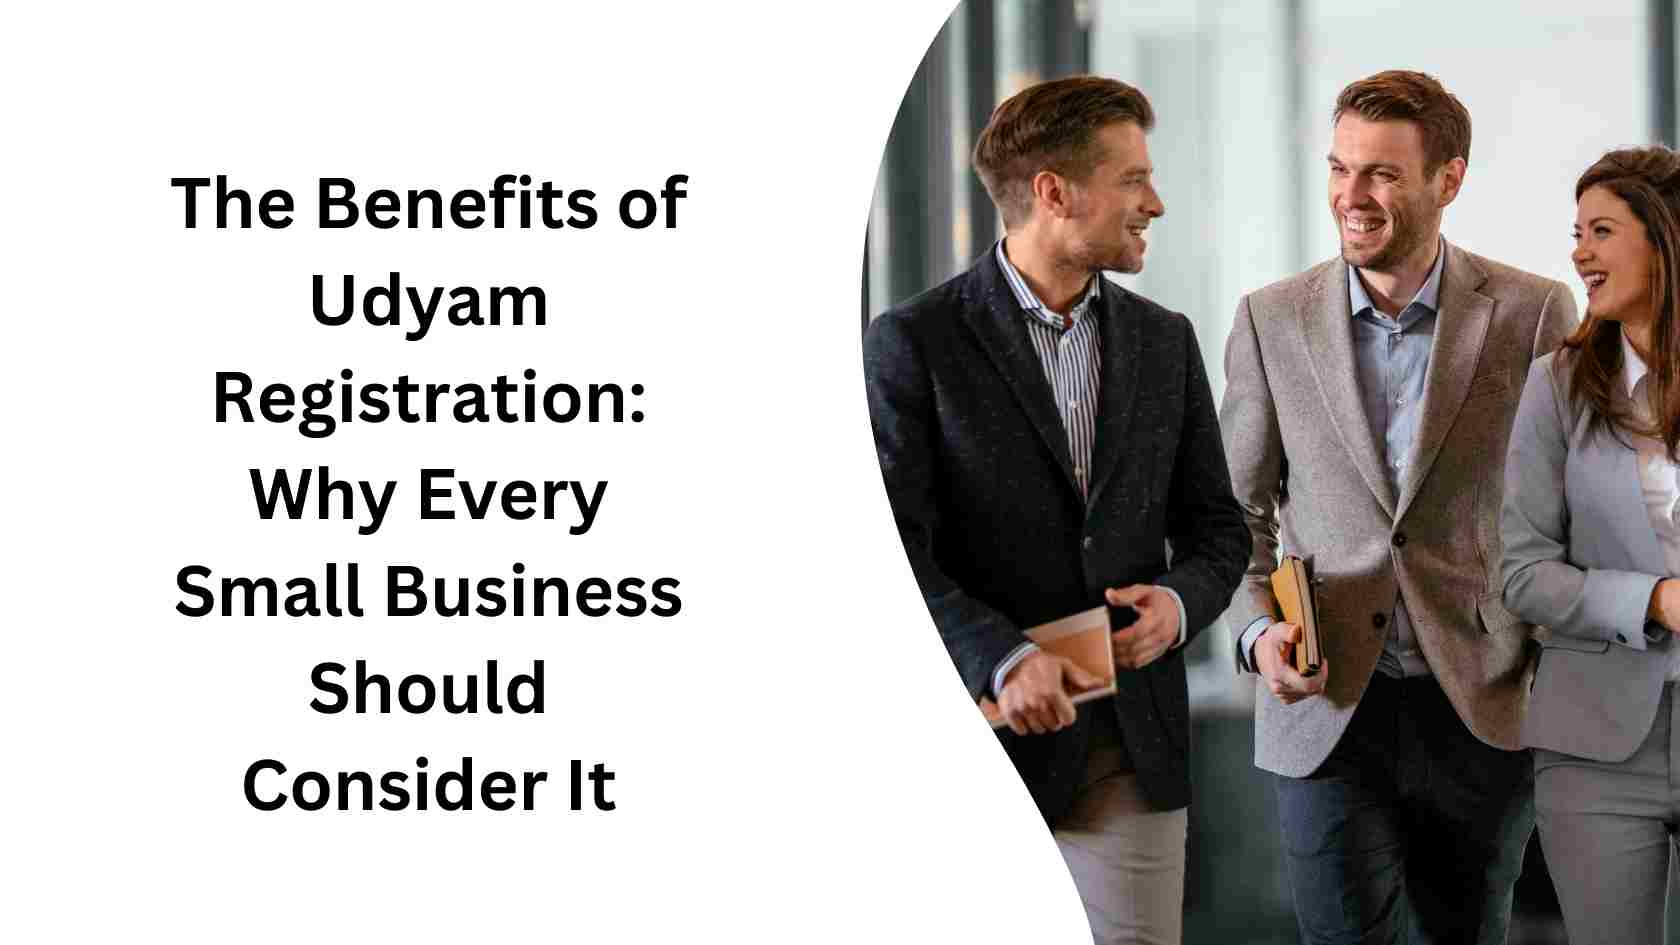 The Benefits of Udyam Registration: Why Every Small Business Should Consider It